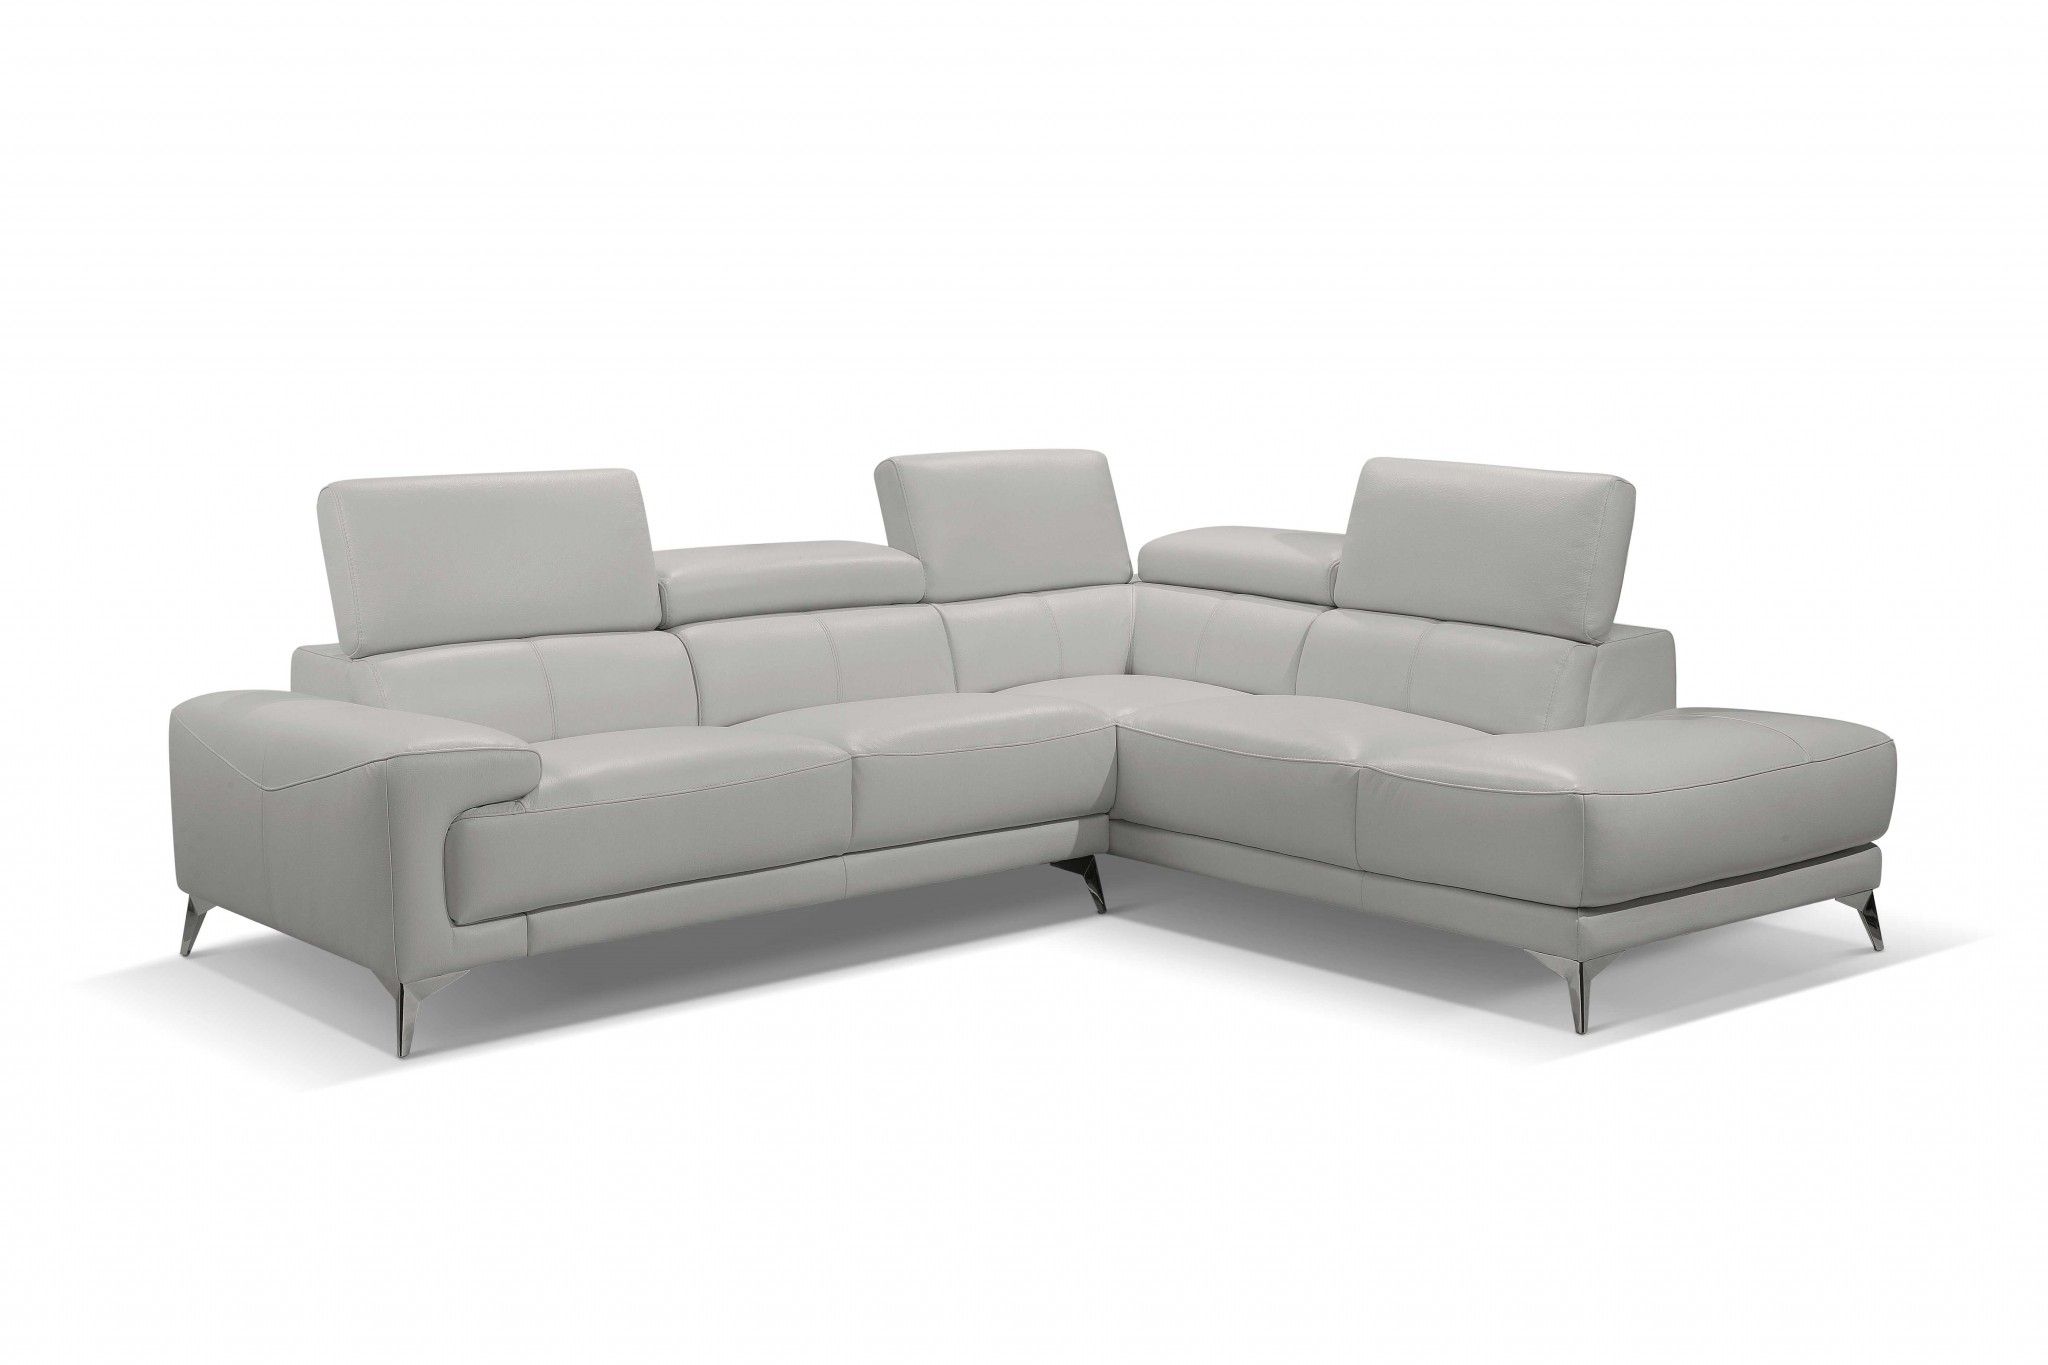 Sectional, Chaise On Right When Facing, White Top Grain Within [%matilda 100% Top Grain Leather Chaise Sectional Sofas|matilda 100% Top Grain Leather Chaise Sectional Sofas%] (View 14 of 15)